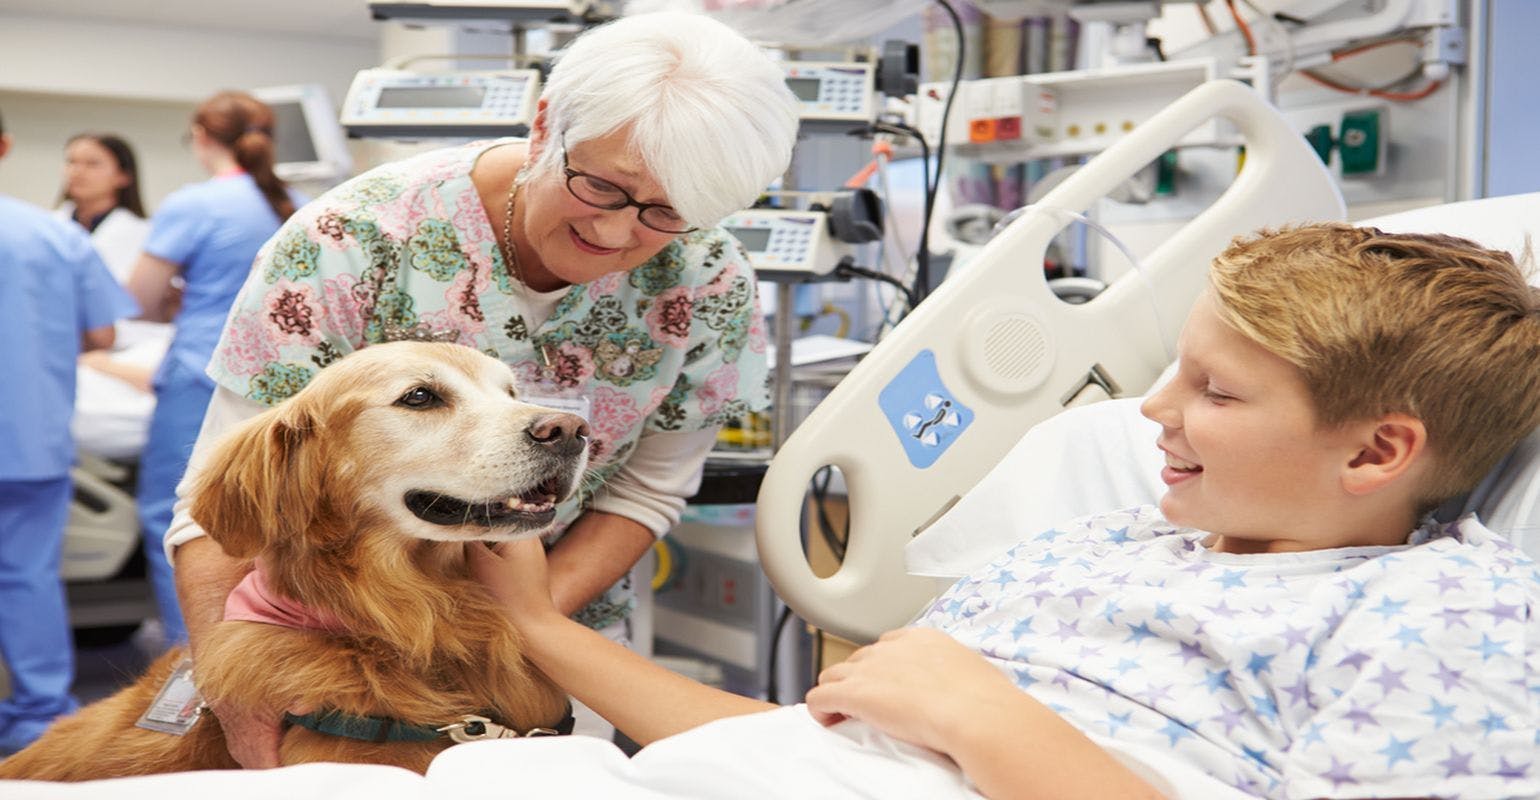 Cleaning Procedure Prevents Therapy Dogs From Spreading MRSA to Children With Cancer